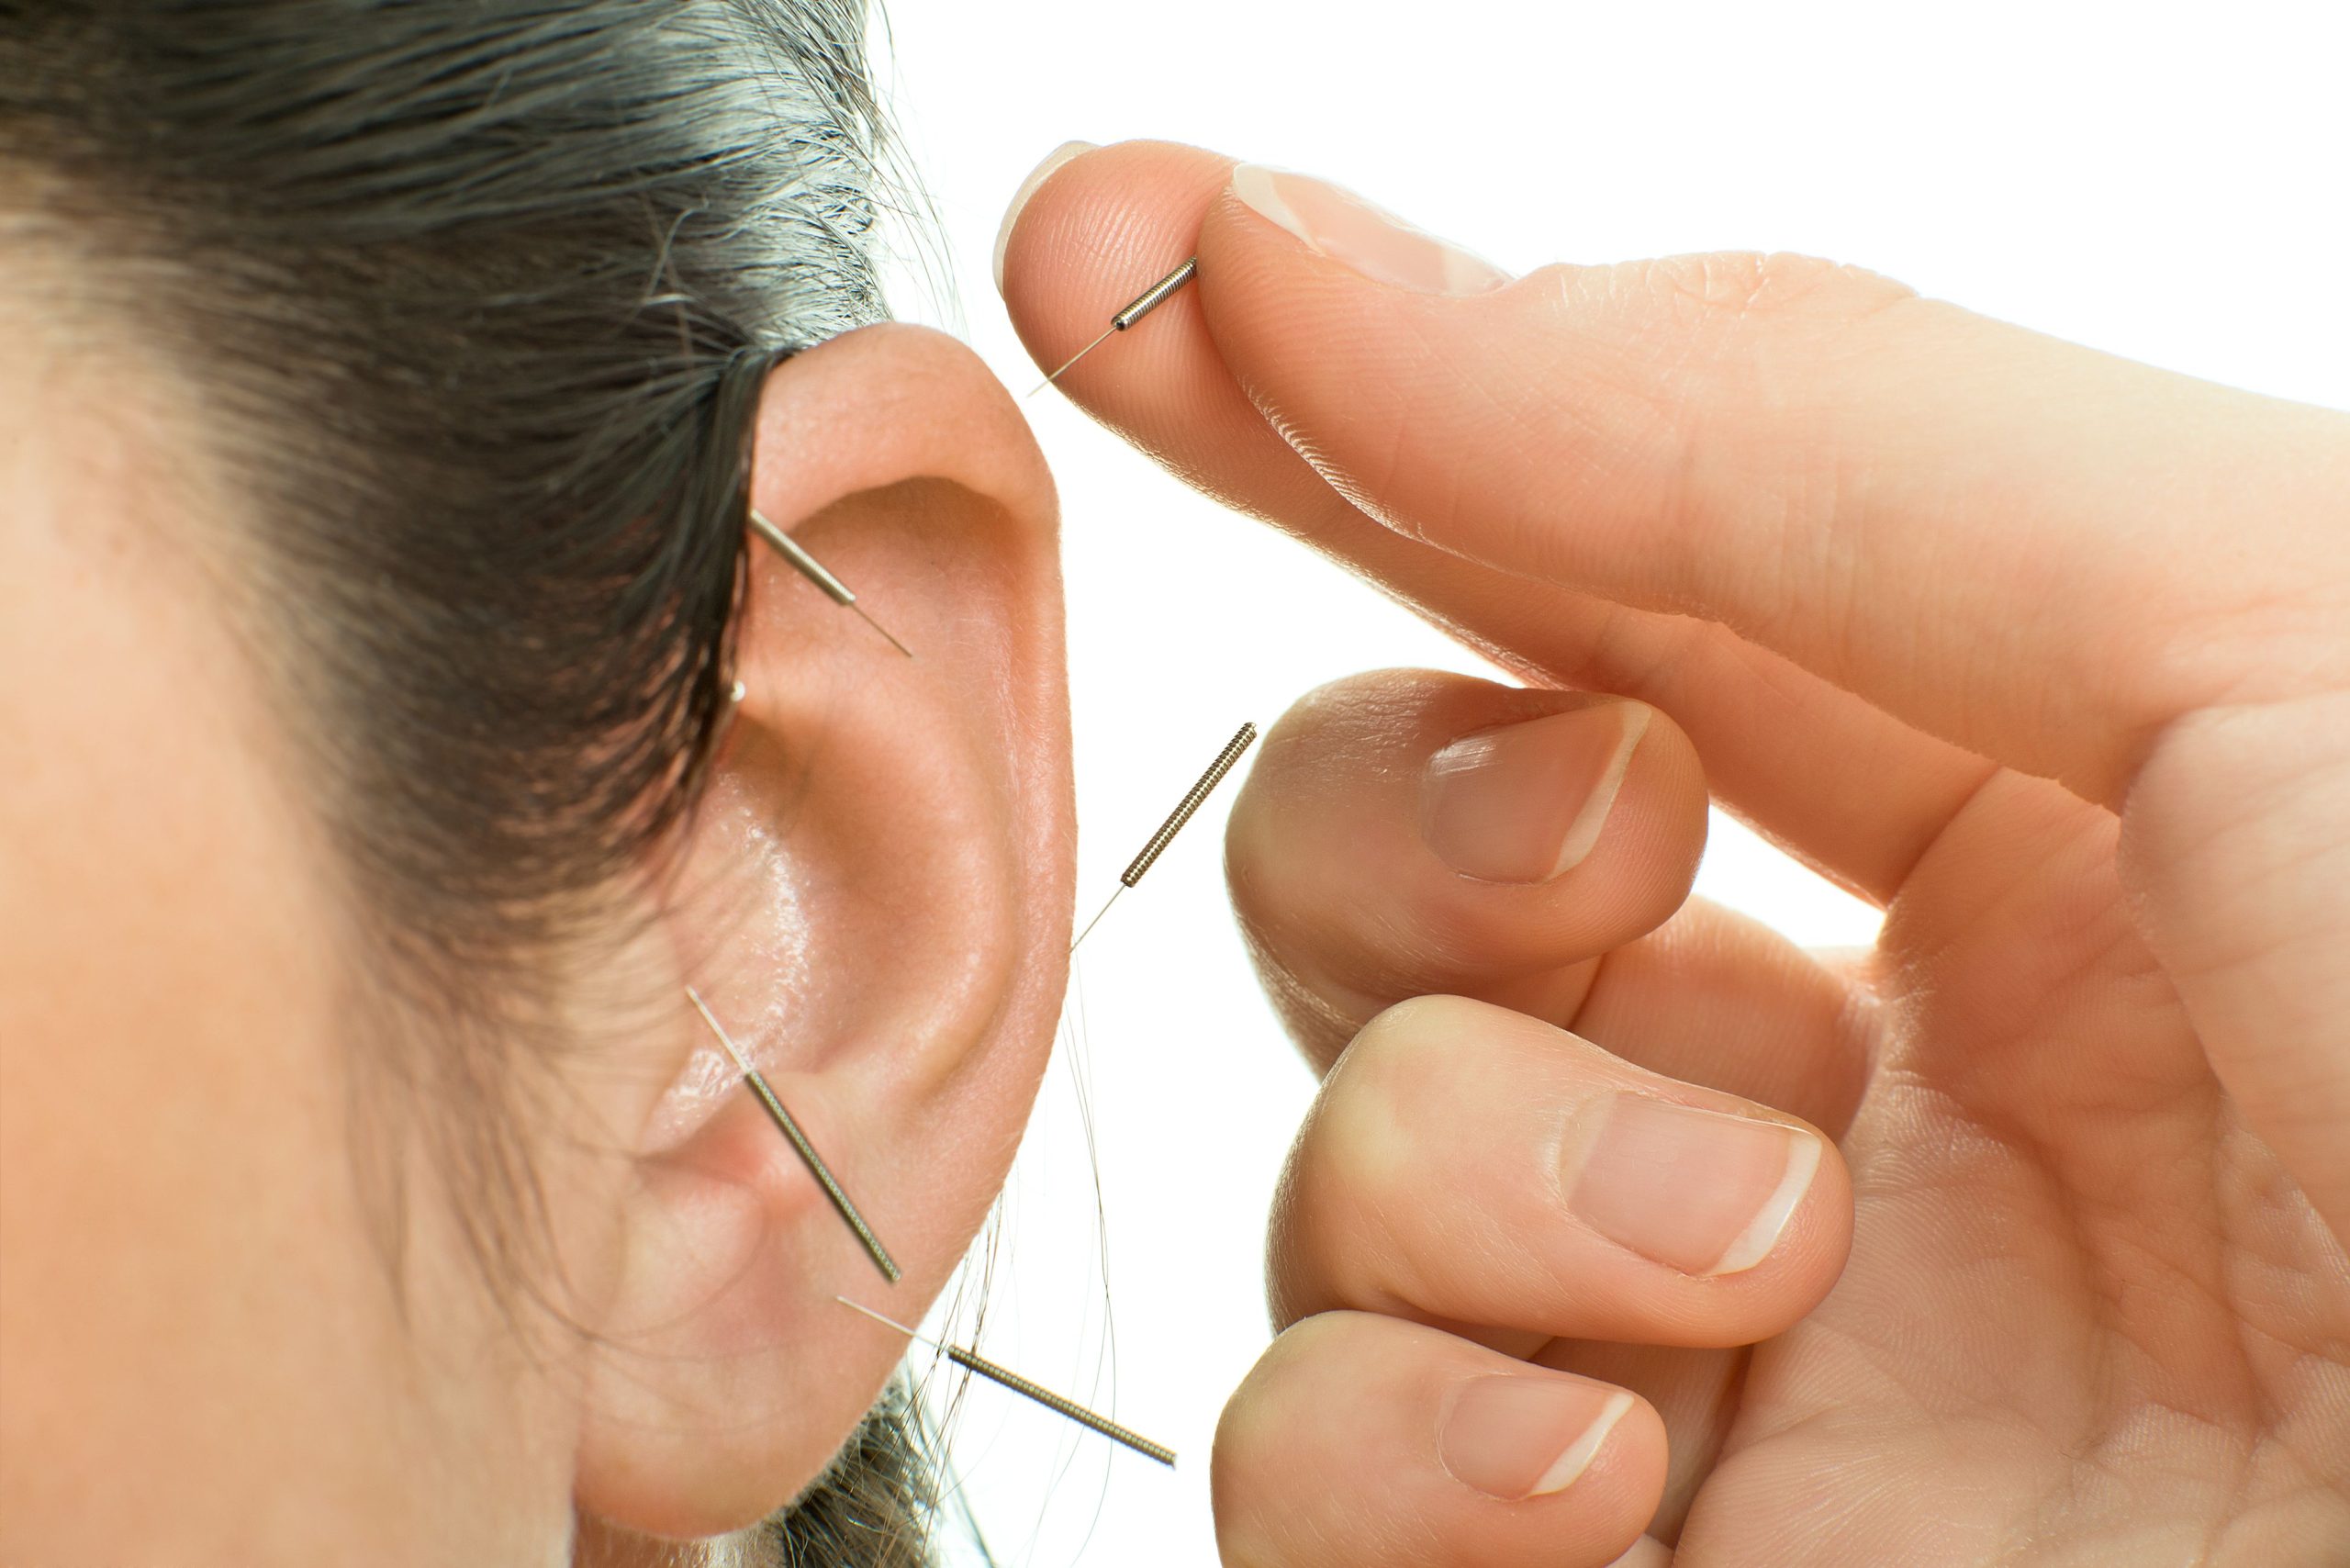 Ear Acupuncture A Guide To Its Healing Potential1